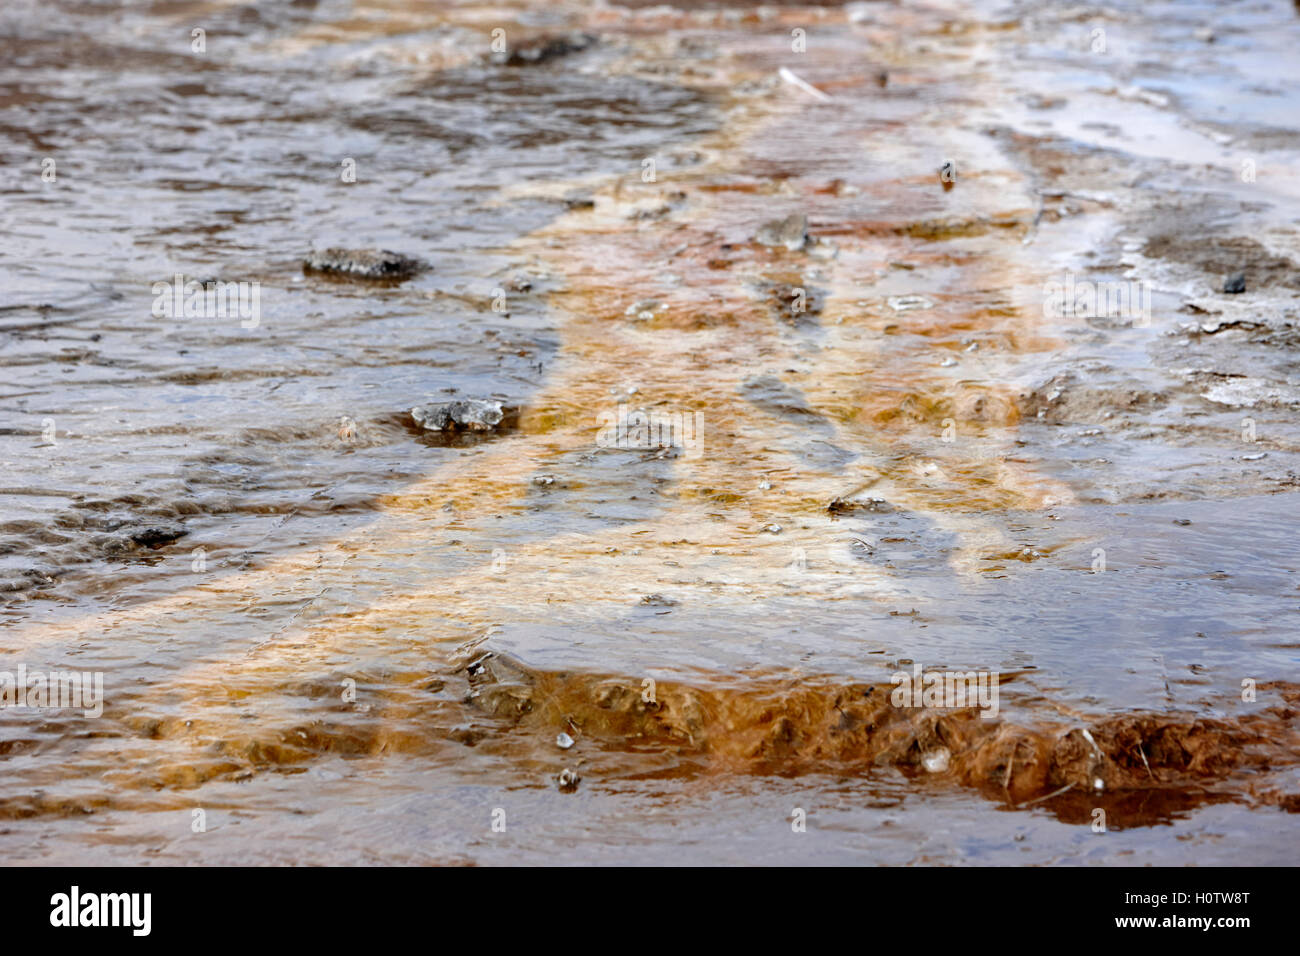 chemical and geological deposits caused by geyser water overflow geysir Iceland Stock Photo